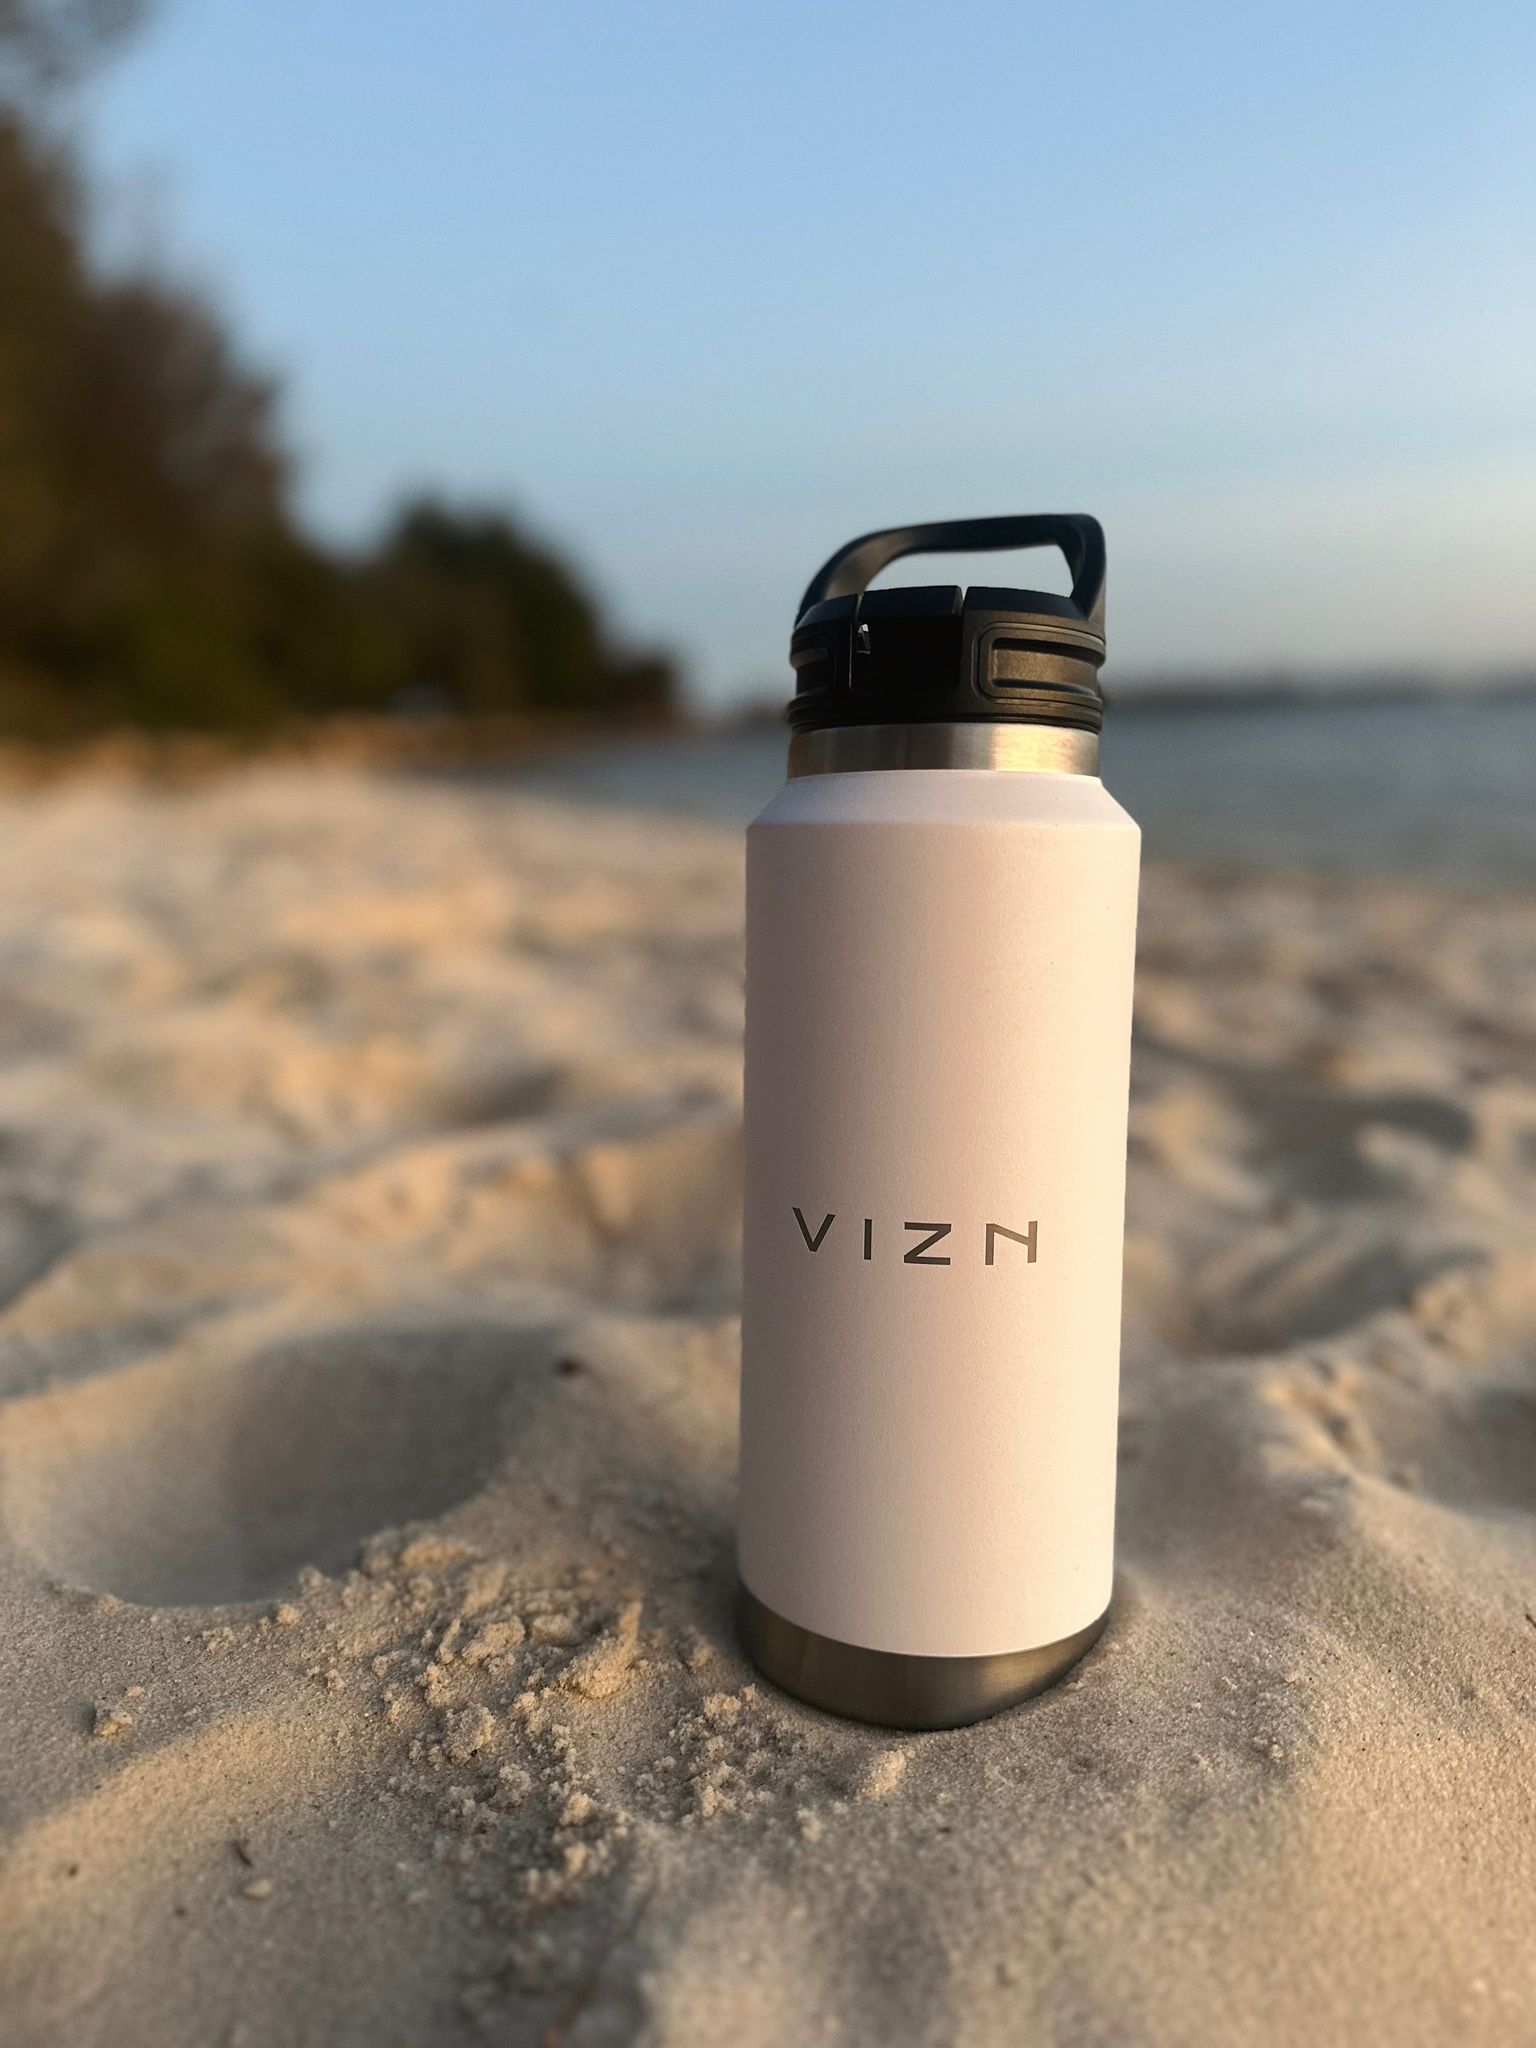 Snow white stainless steel water bottle with straw lid and carry handle on the sandy beach.